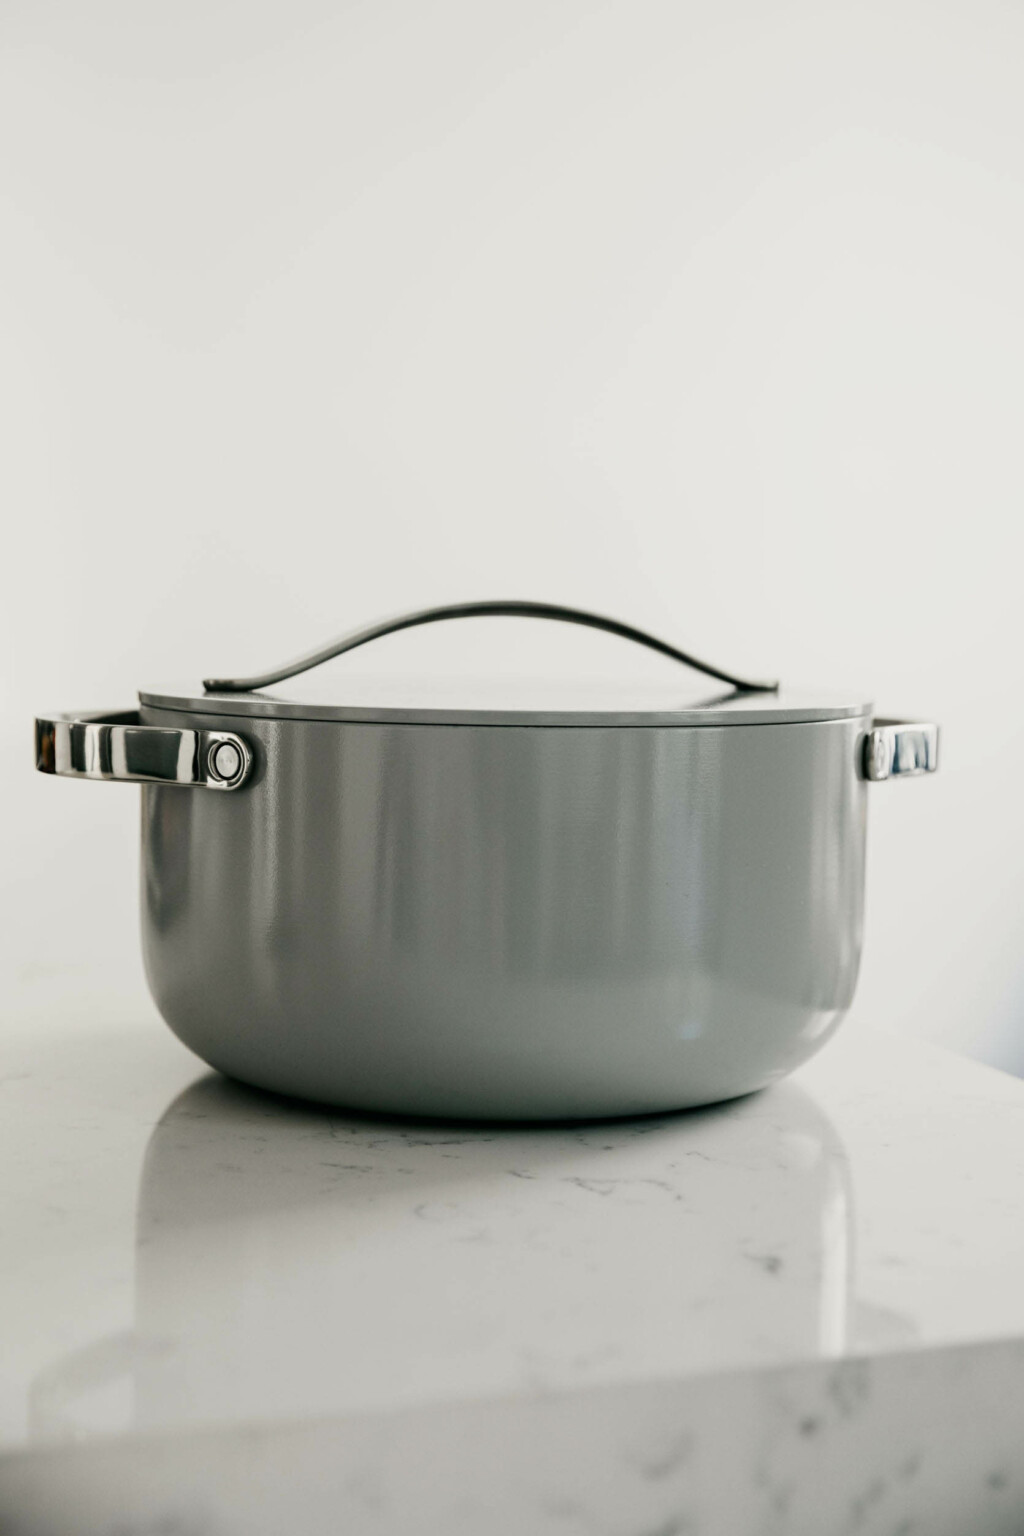 Why I returned my Caraway Cookware Set